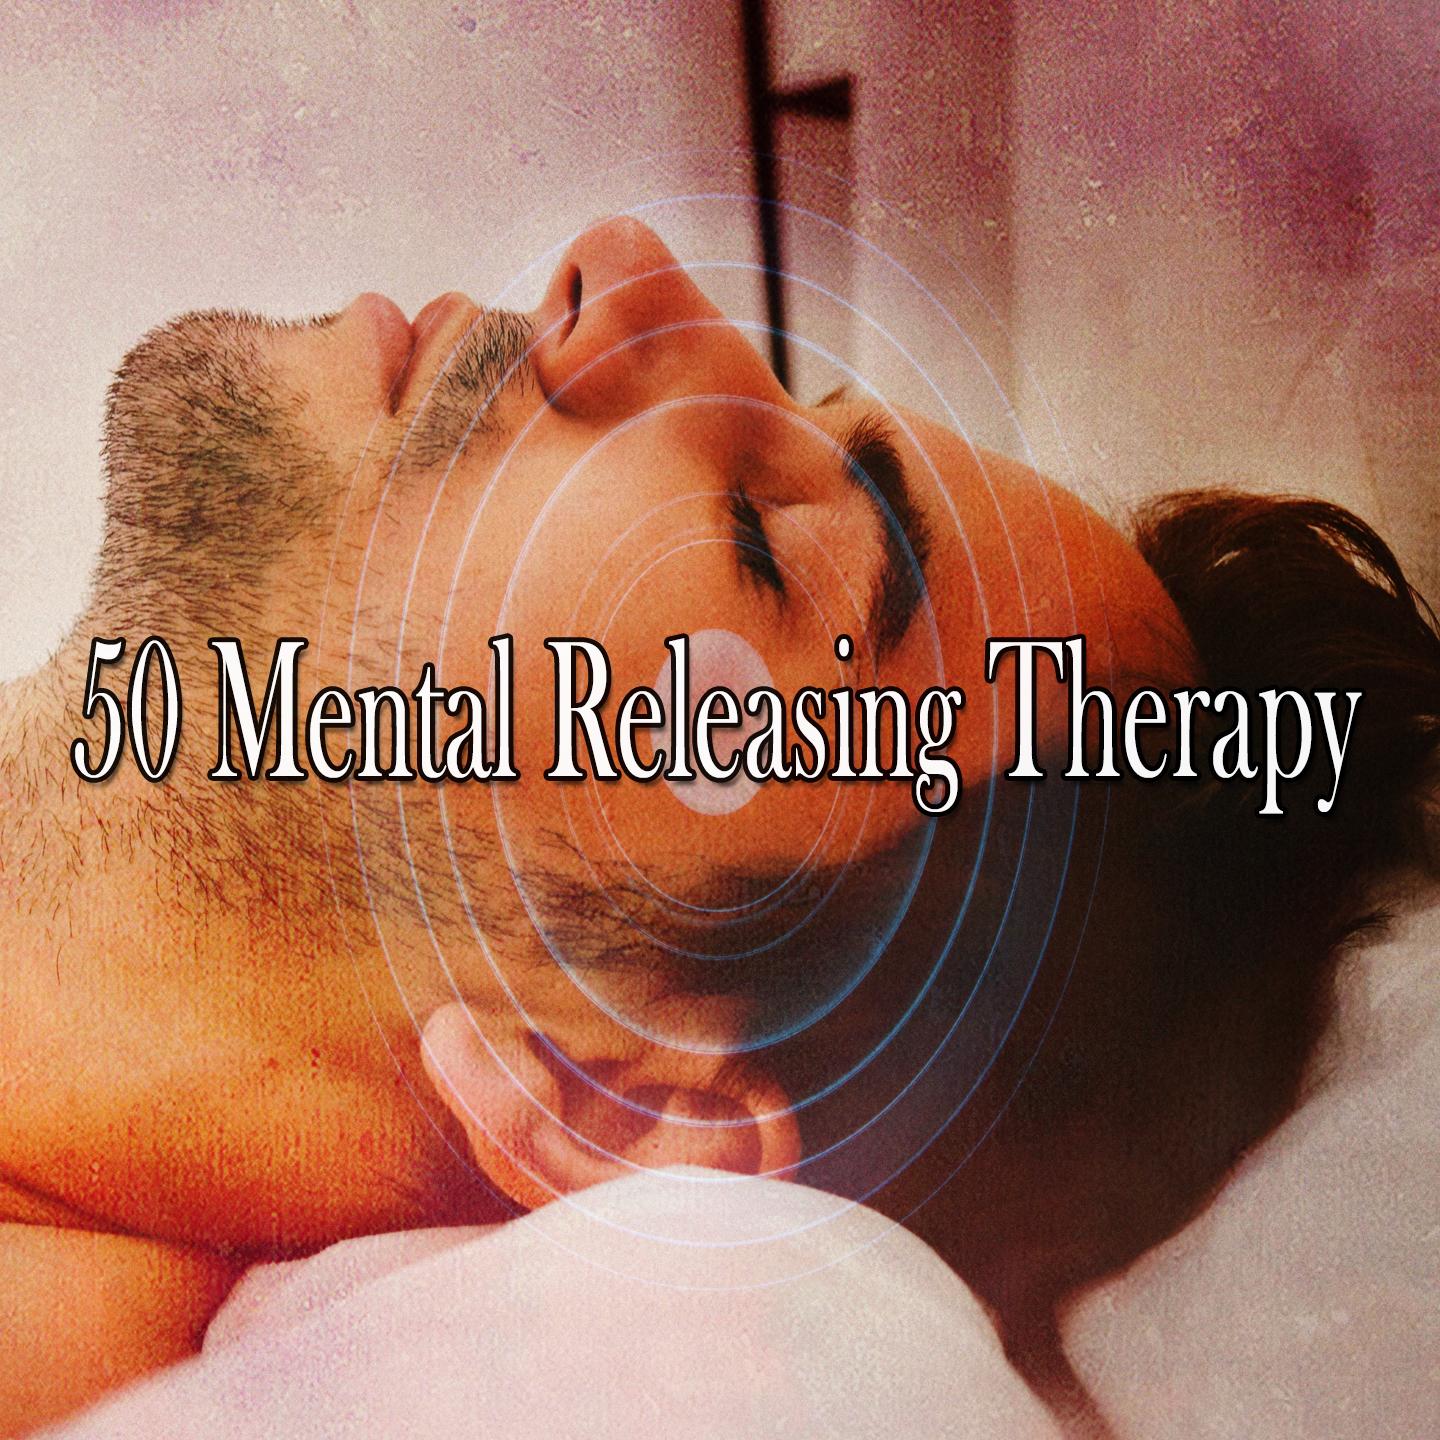 50 Mental Releasing Therapy